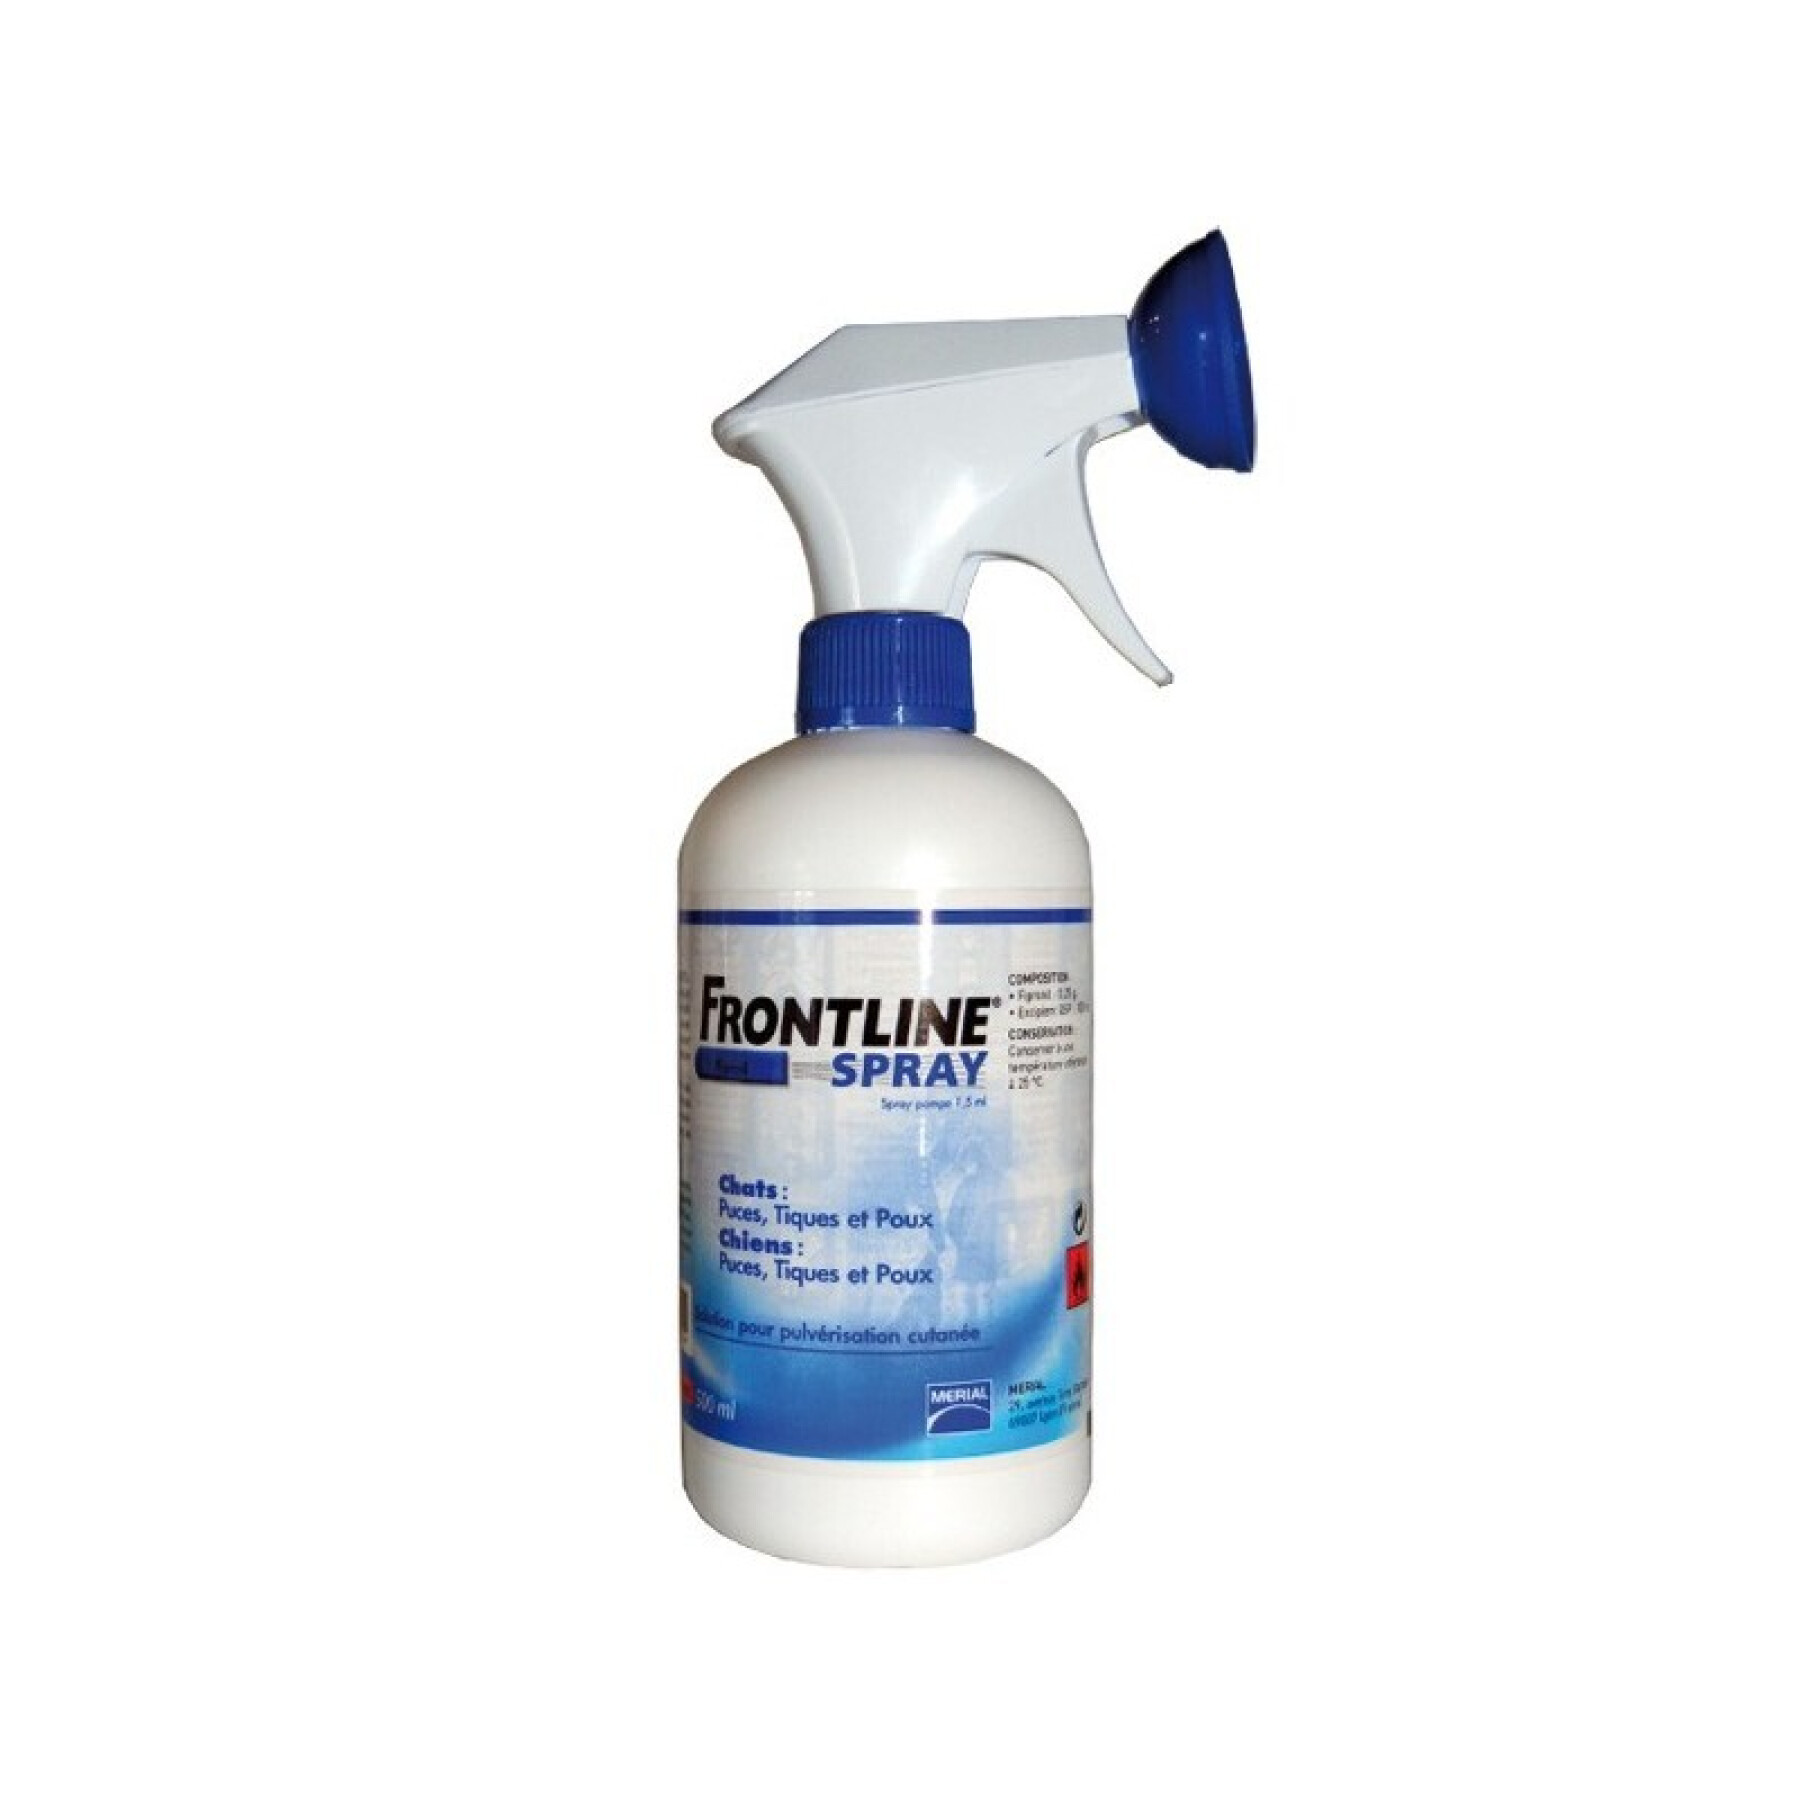 Anti-insect spray Frontline